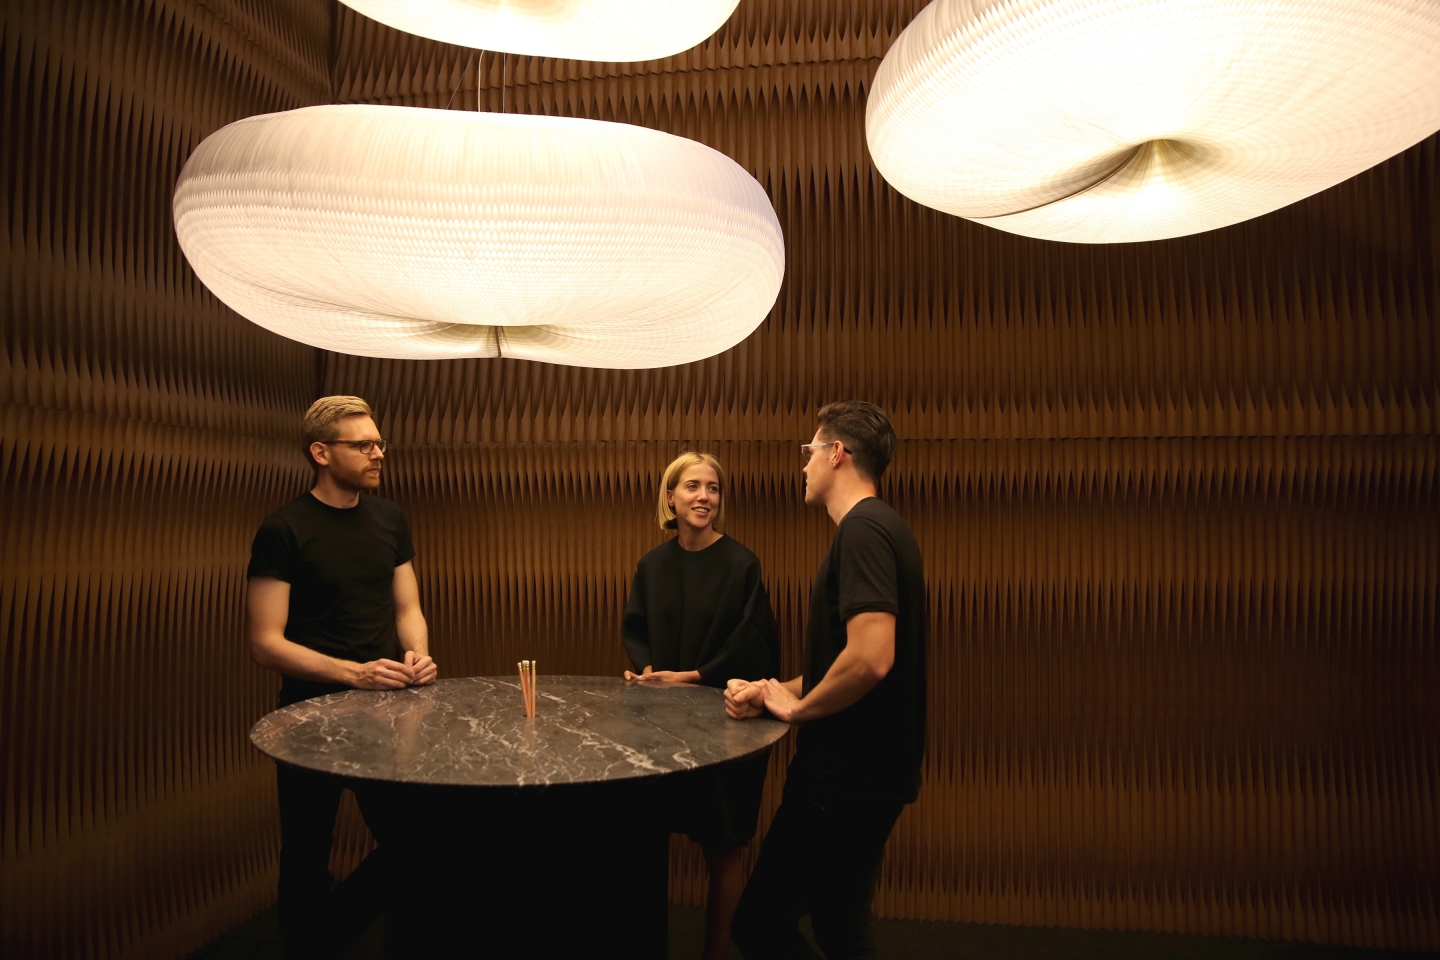 paper lighting and accordion paper furniture by molo - a group chats around a cantilever table with a black marble top, beneath a canopy of clouds